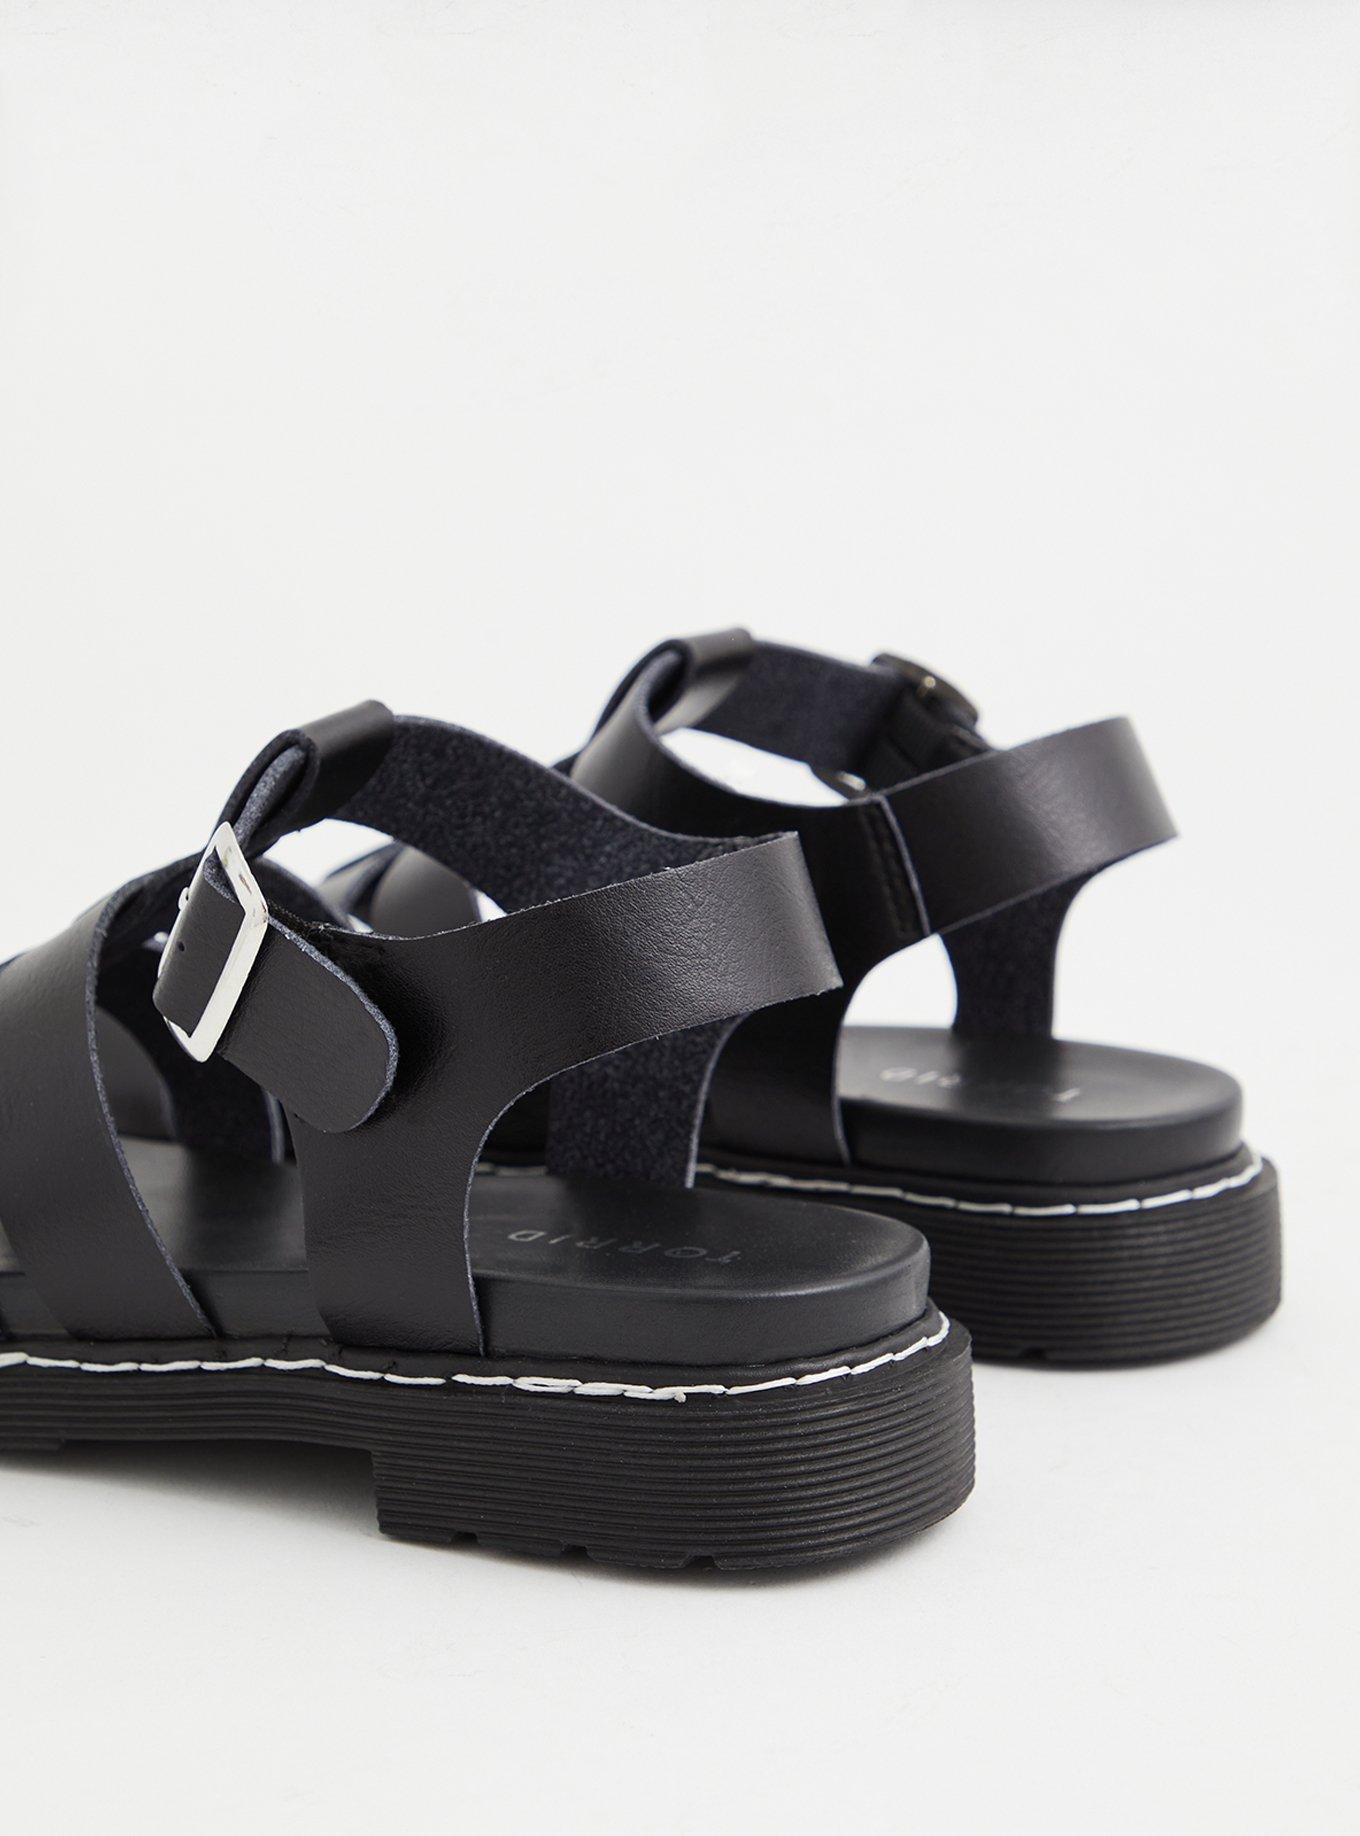 Torrid 10 WW Black Faux Leather Sandals Womens extra wide width Straps